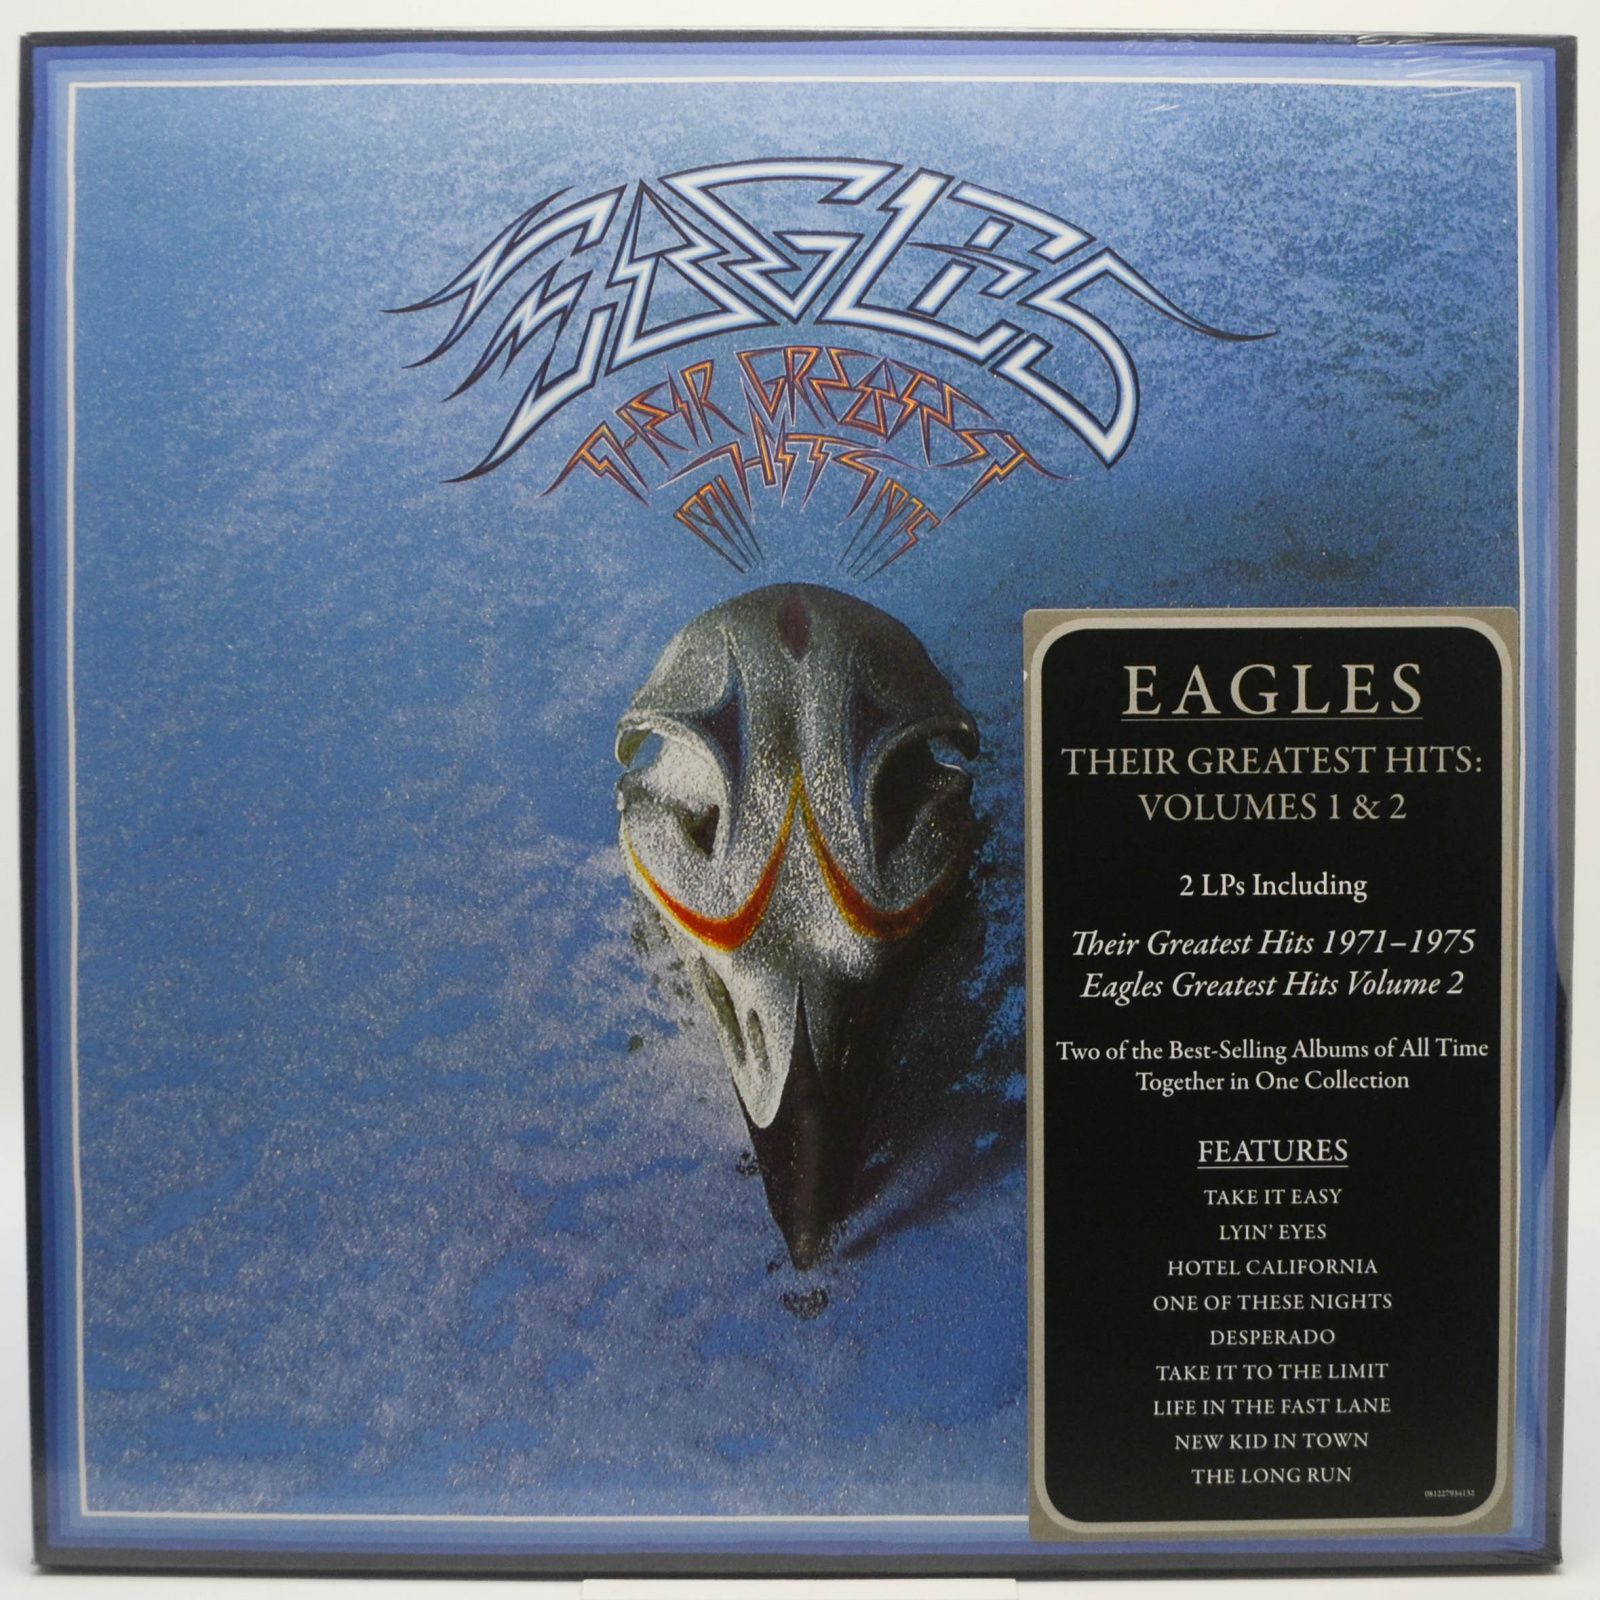 Eagles — Their Greatest Hits Volumes 1 & 2 (2LP), 2017